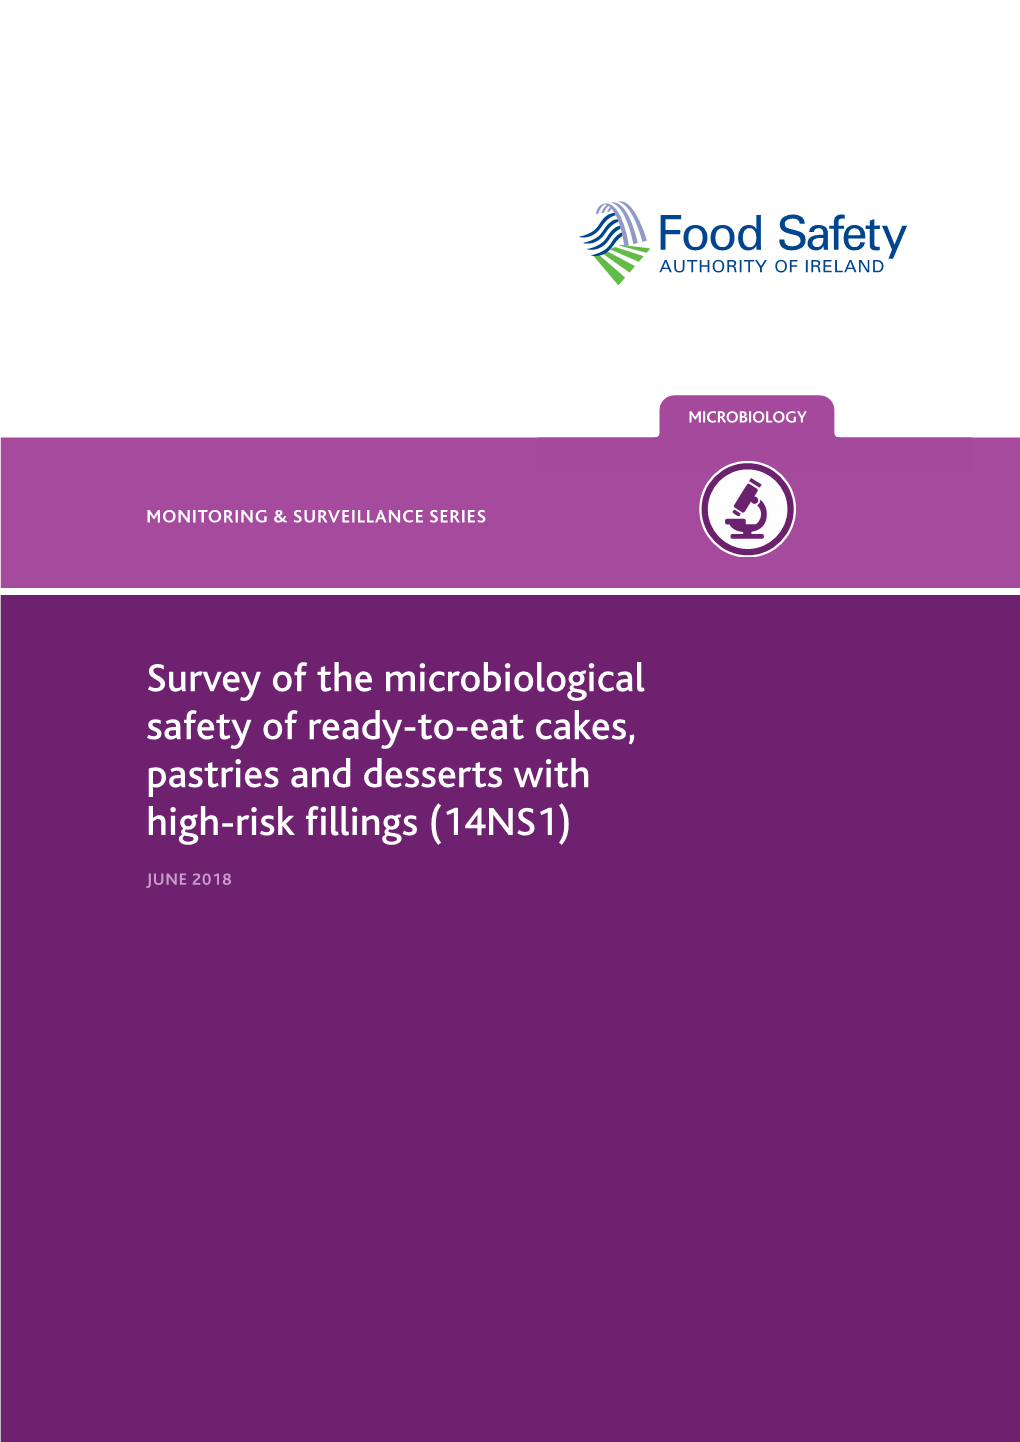 Survey of the Microbiological Safety of Ready-To-Eat Cakes, Pastries and Desserts with High-Risk Fillings (14NS1)